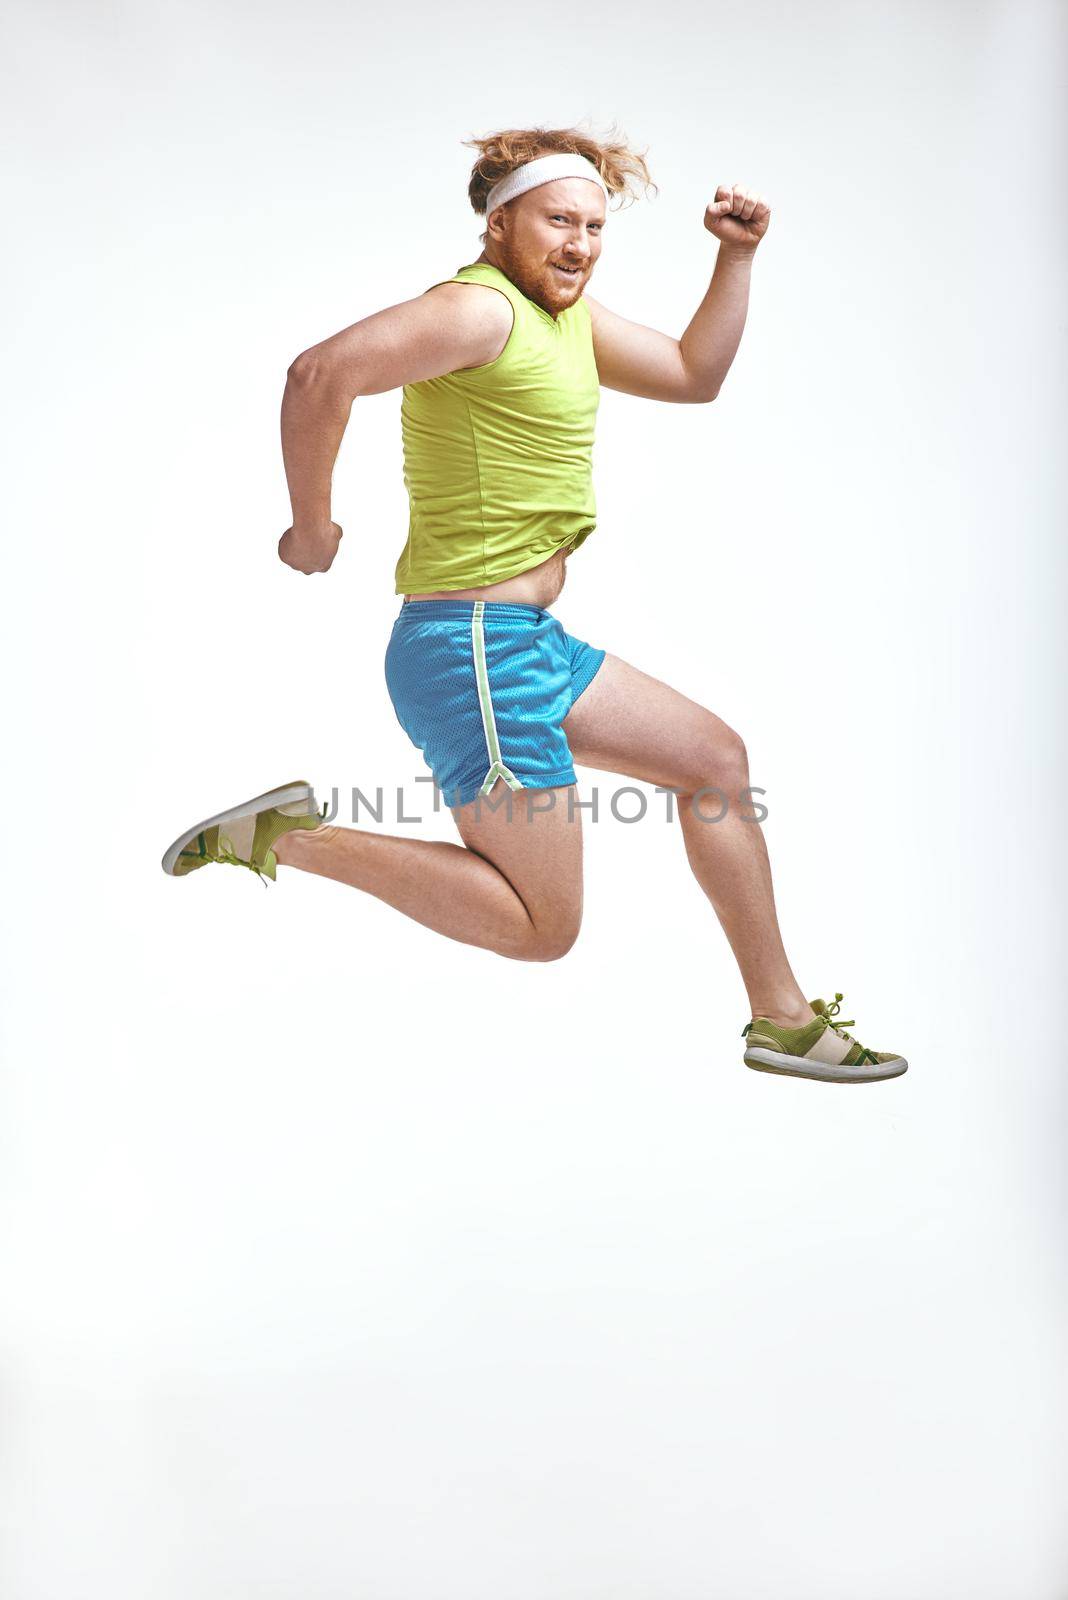 Funny picture of red haired, bearded, plump man on white background. Man wearing sportswear